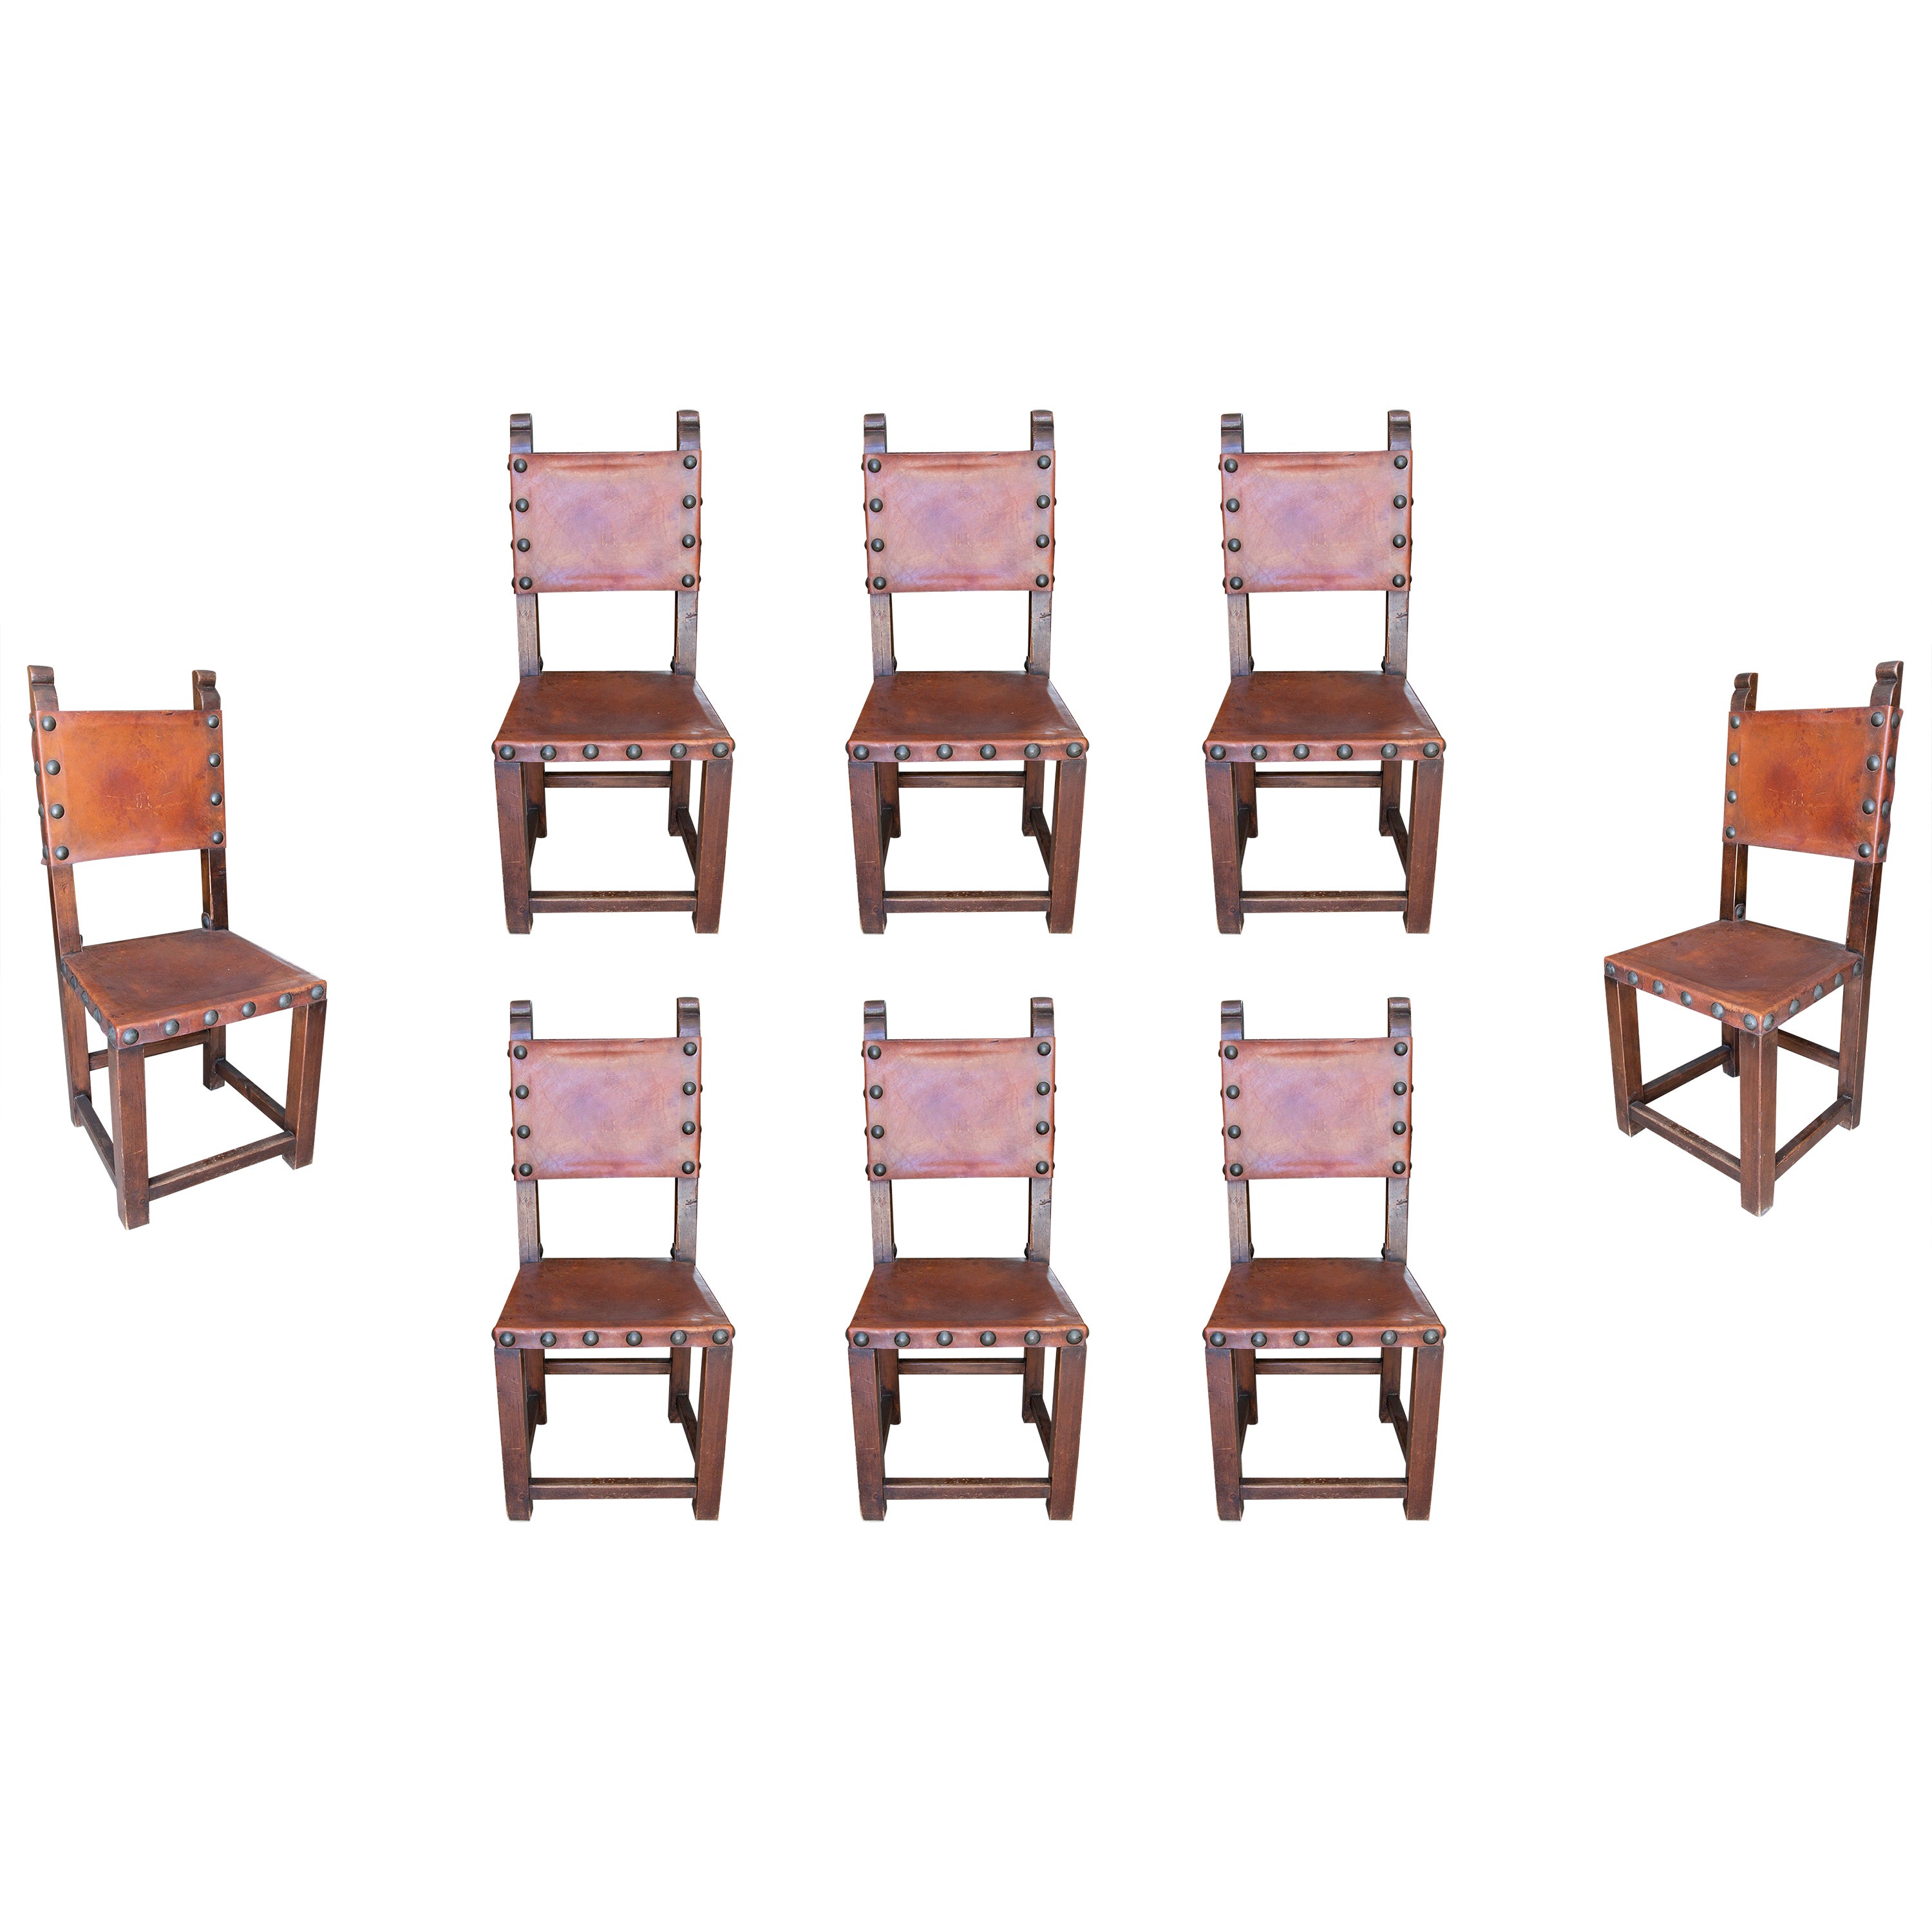 Set of Eight Handmade Wooden and Studded Leather Chairs For Sale